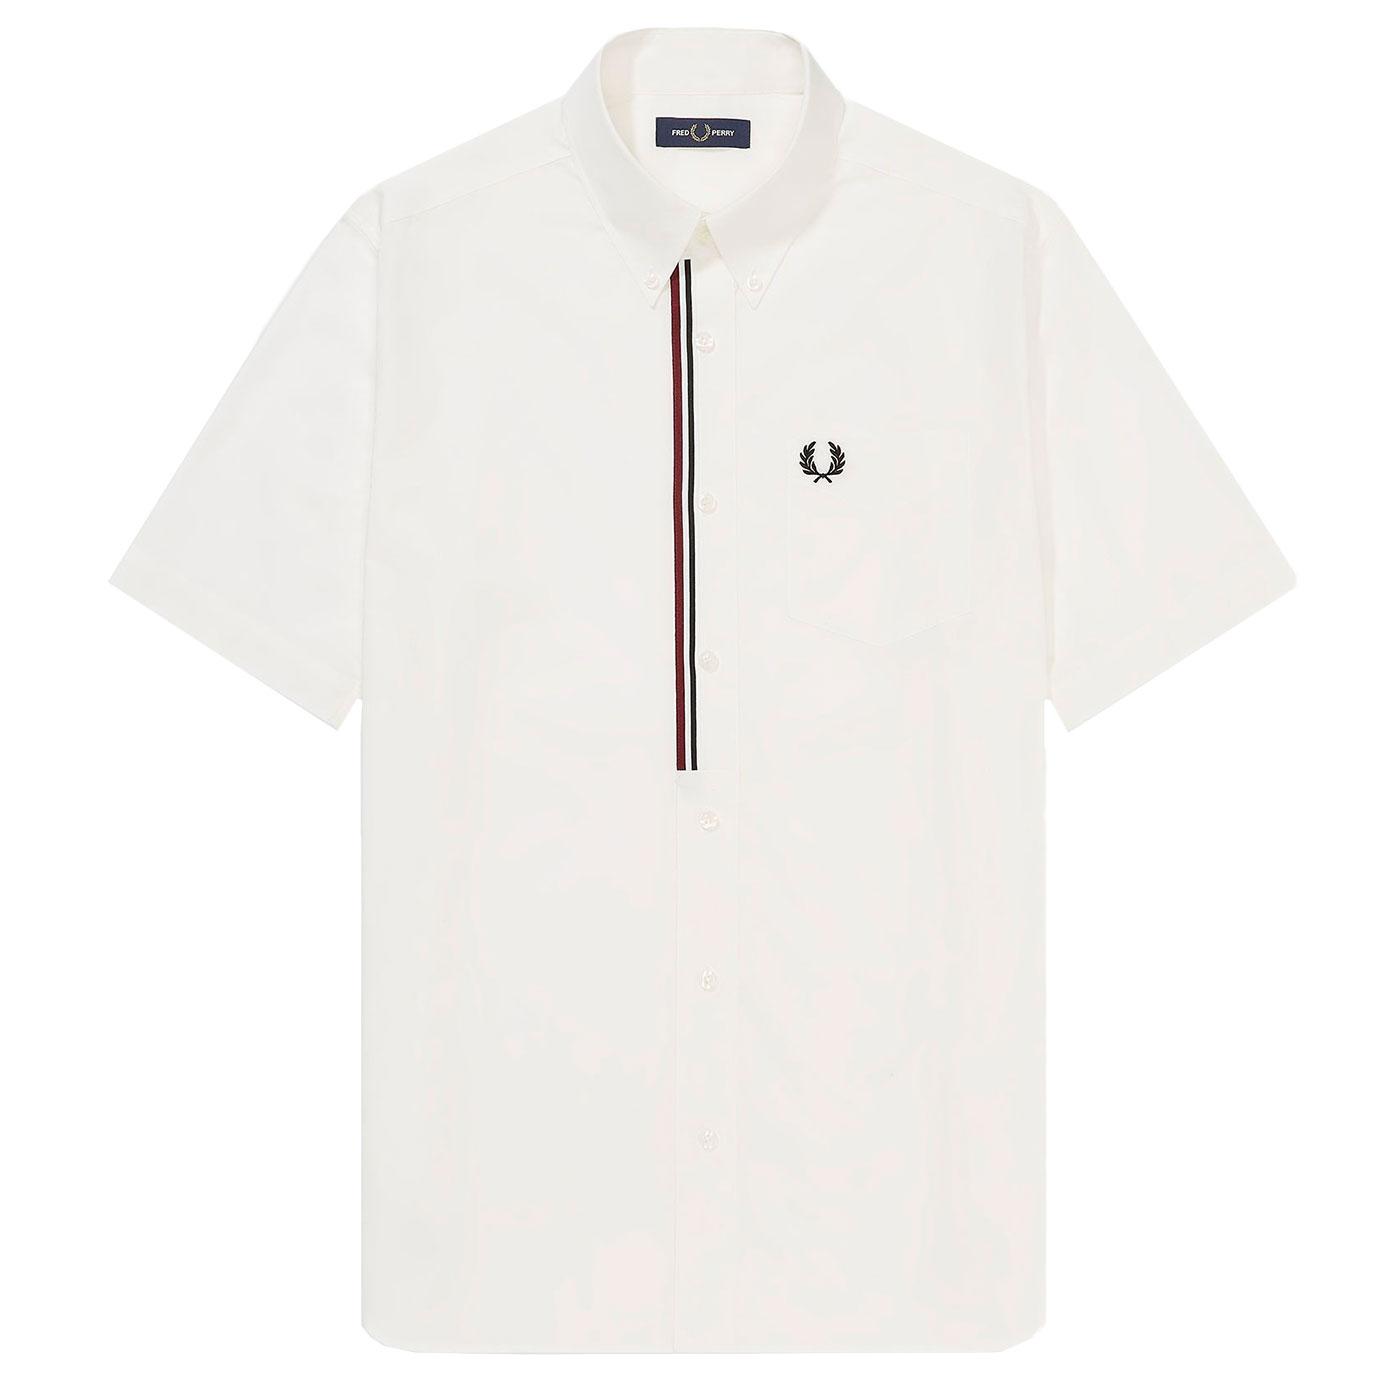 FRED PERRY Men's Mod Taped Placket SS Shirt Snow White